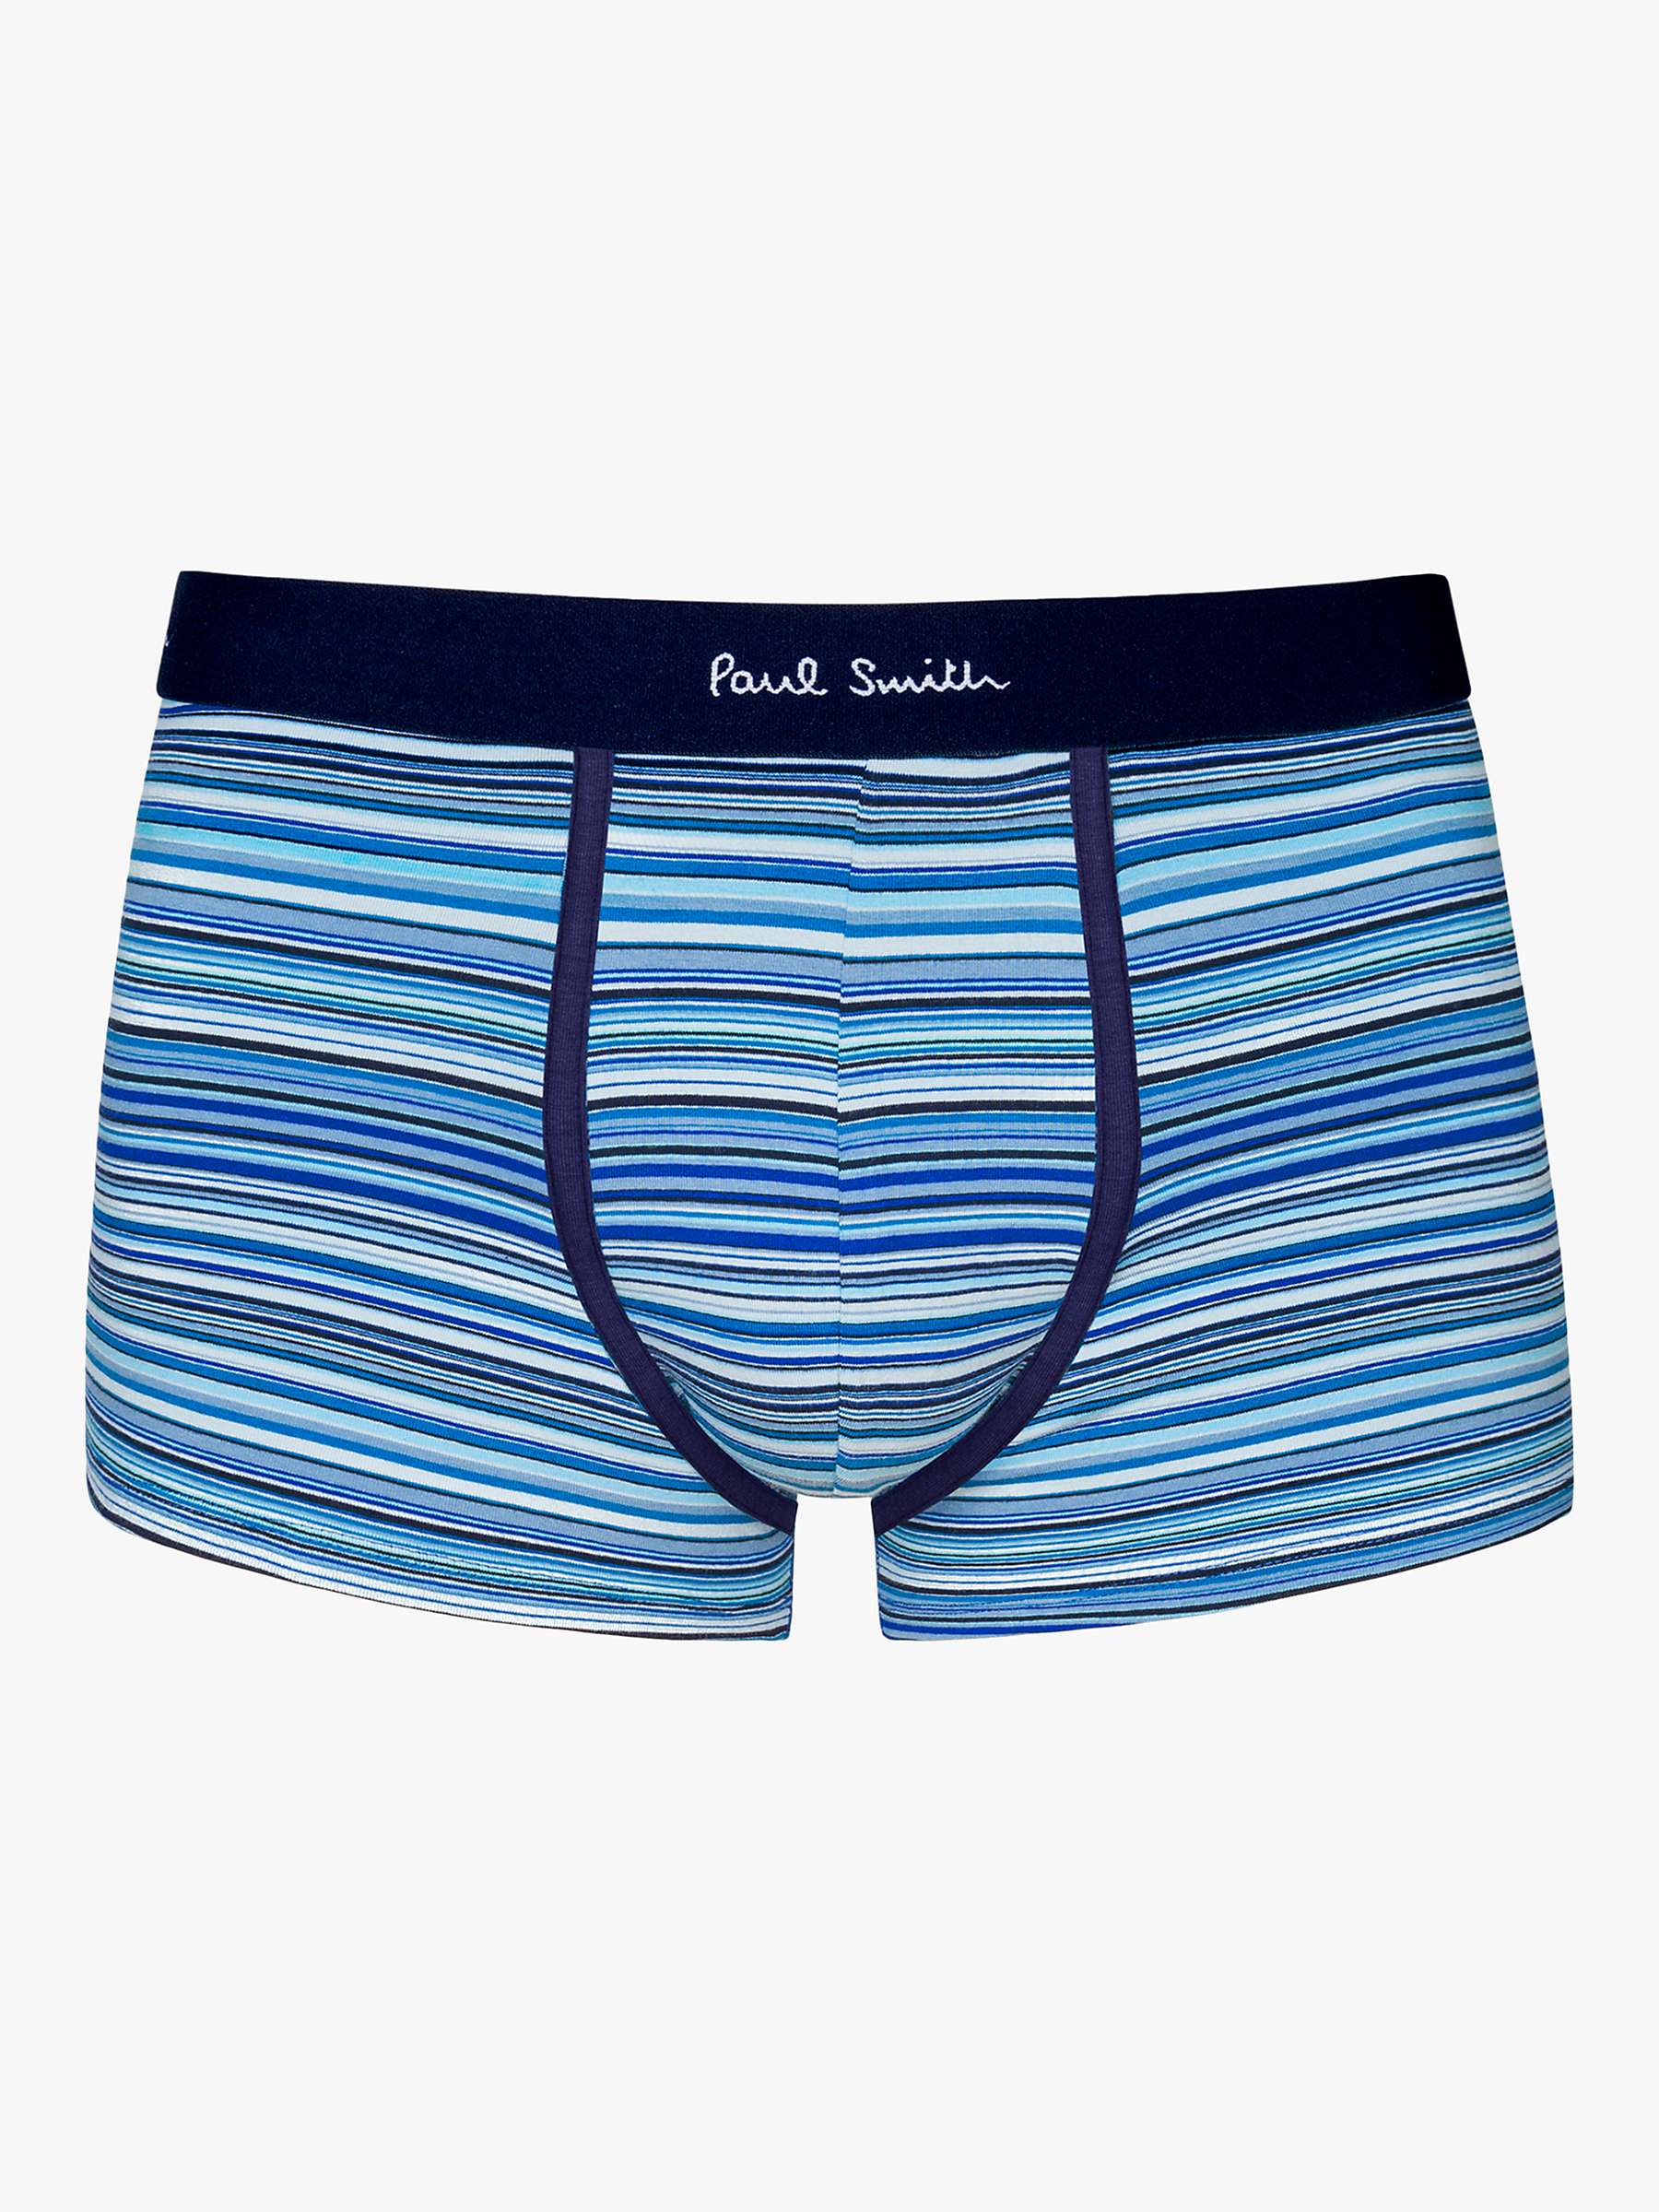 Buy Paul Smith Stripe and Plain Trunks, Pack of 5, Multi Online at johnlewis.com